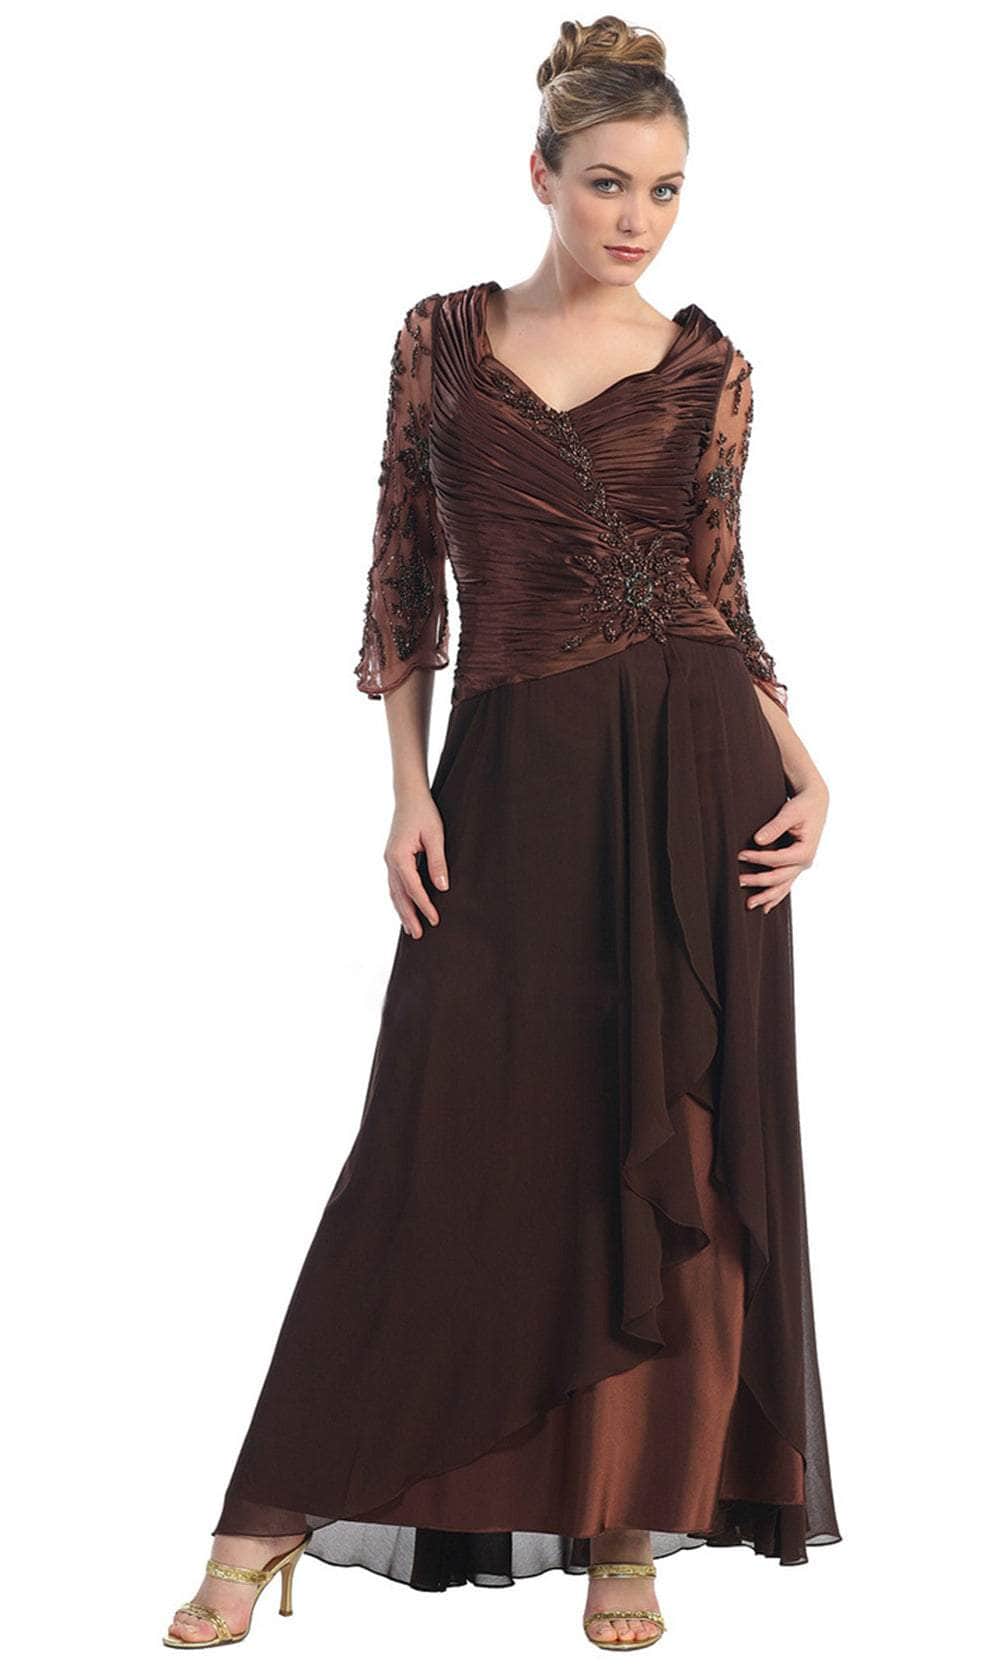 May Queen MQ552 - Ruched Quarter Sleeves Dress Evening Dresses